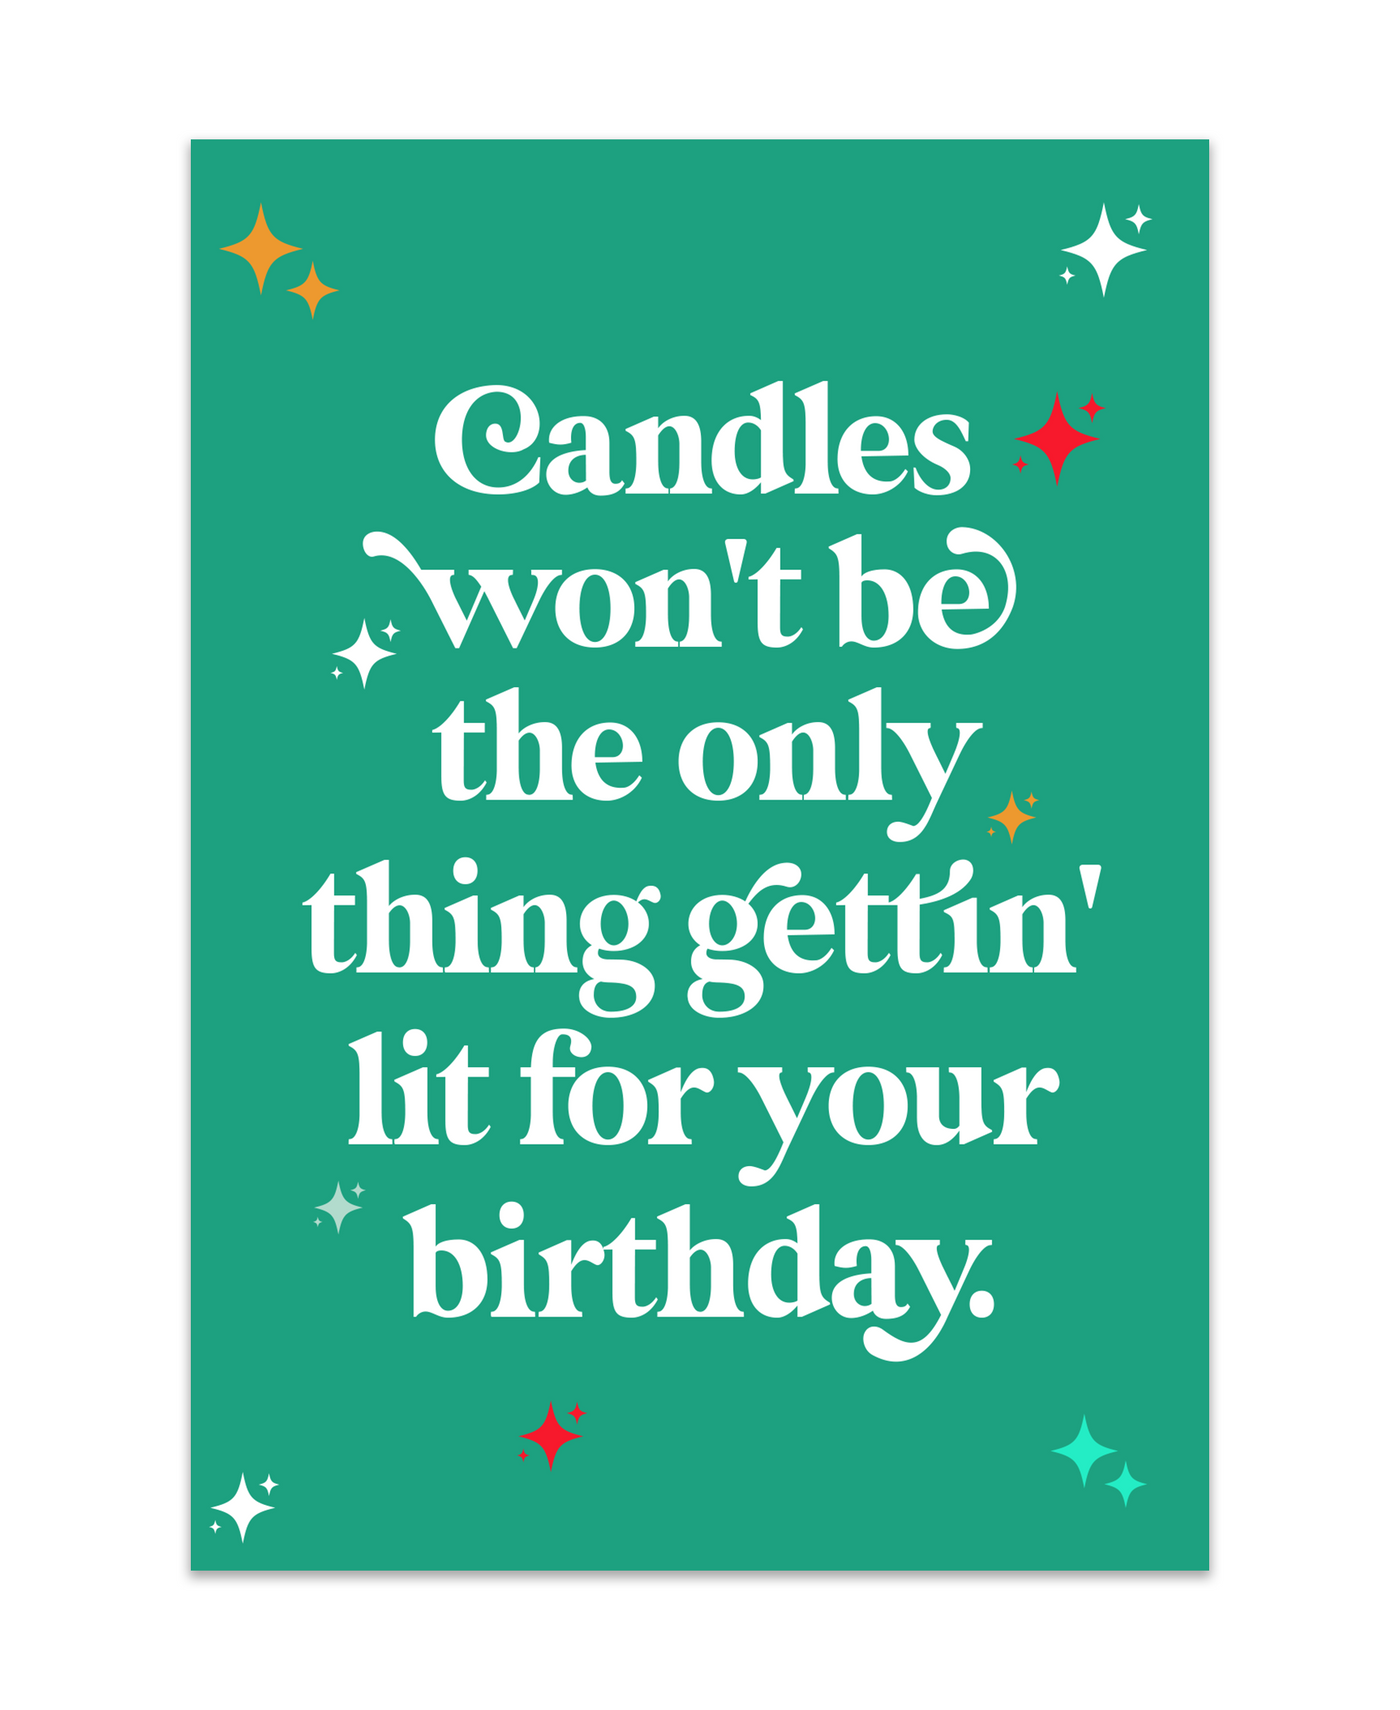 Green vertical card that reads "Candles wont be the only thing gettin' lit for your birthday" with colorful starts in the background.